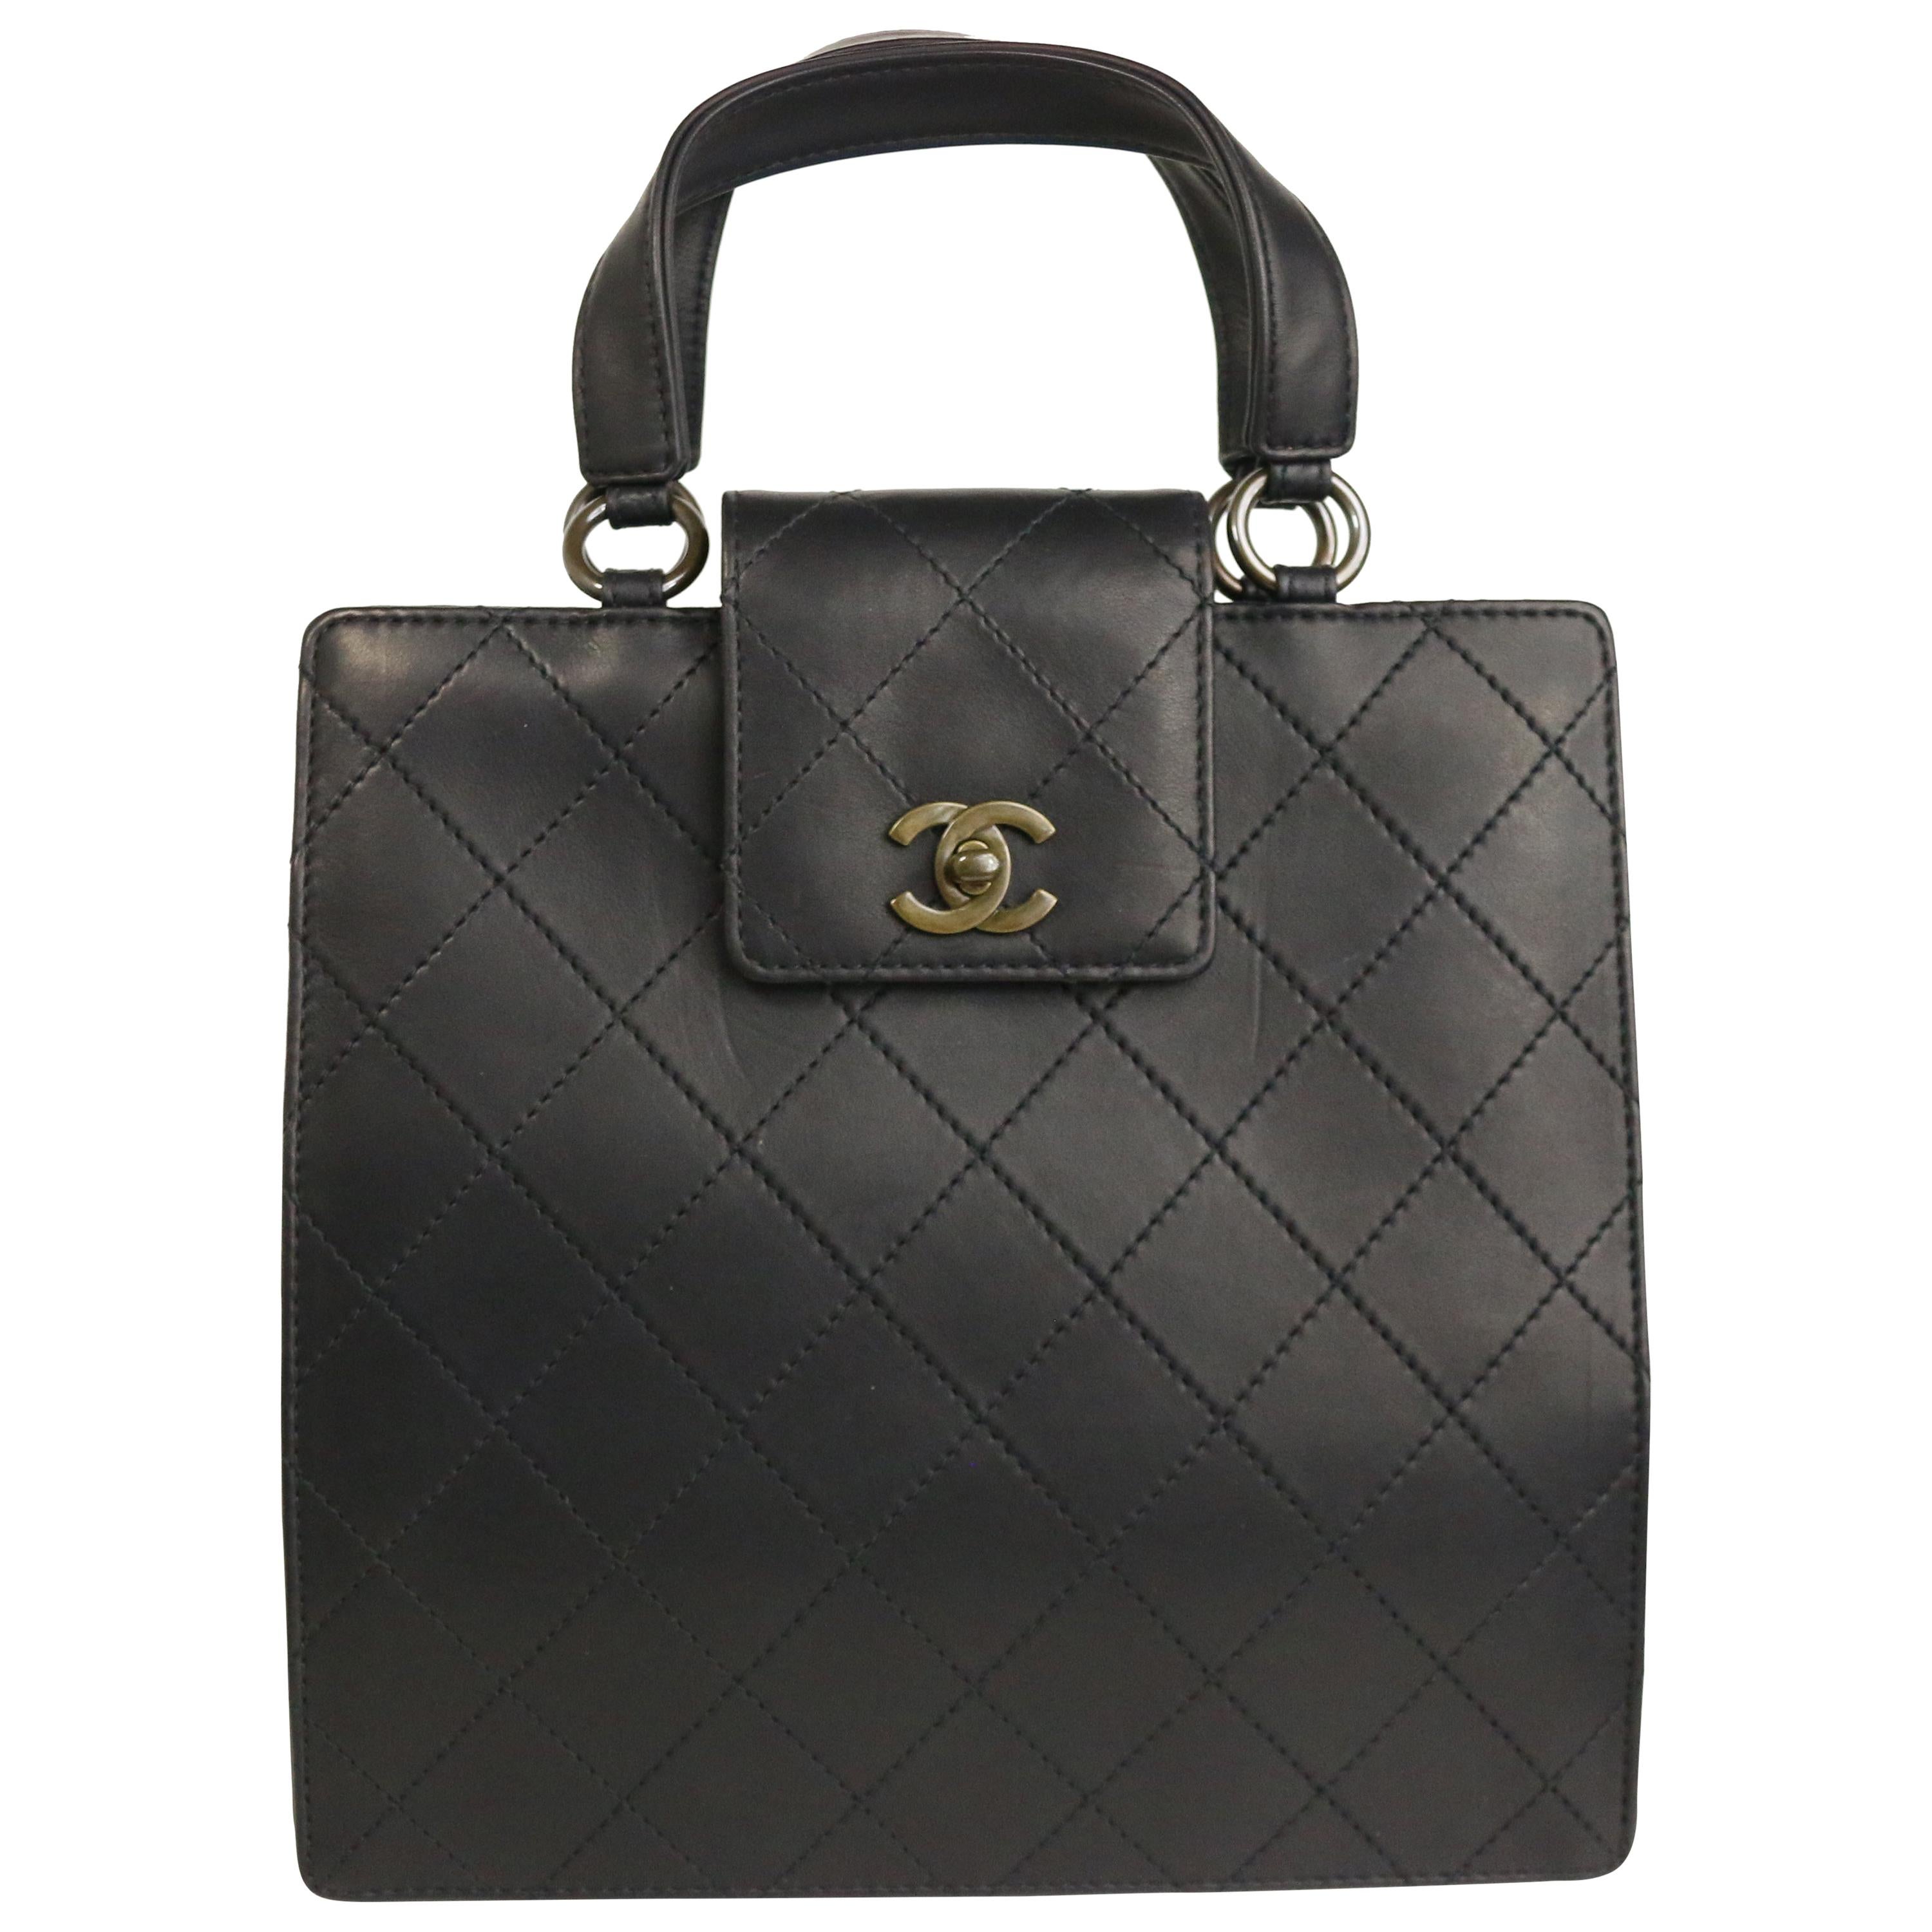 Chanel Black Cow Leather Handle Bag